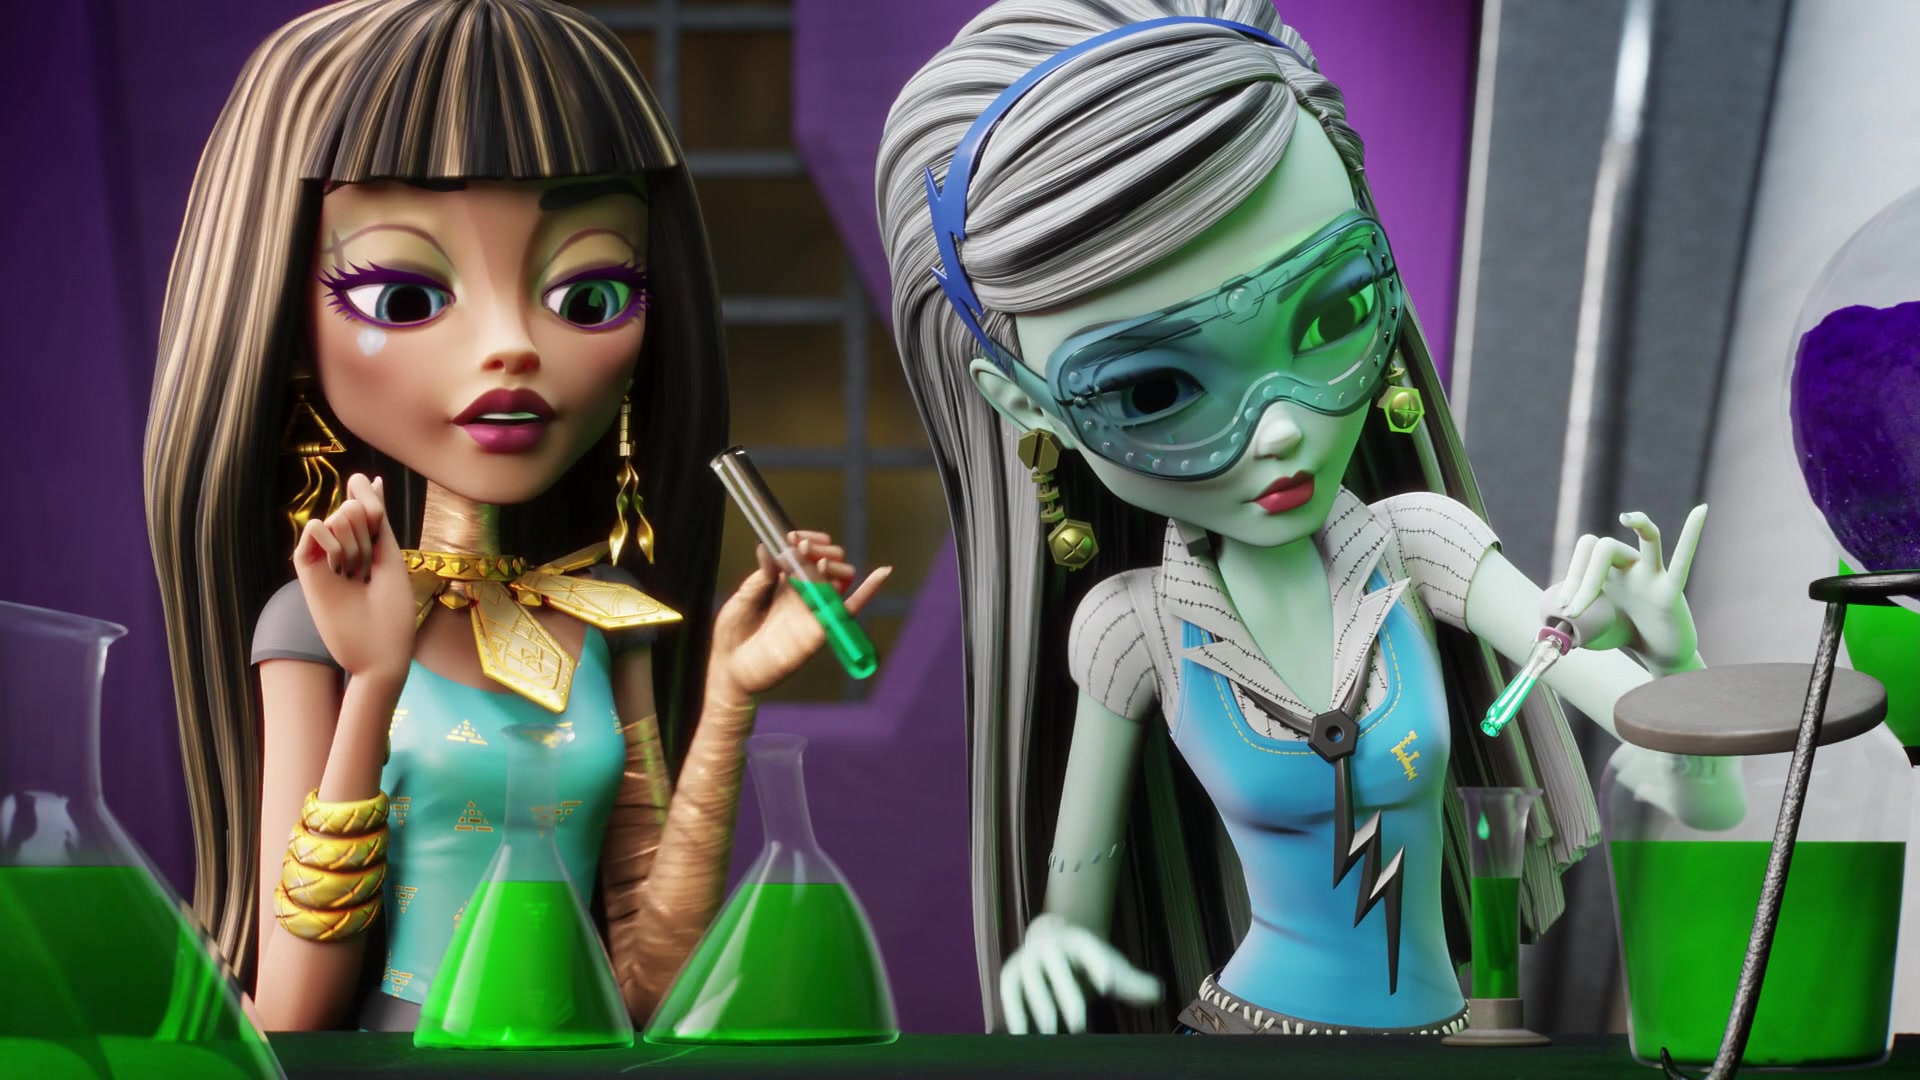 Movie. a href="http://Fancaps.net/movies/MovieImages.php?name=Monster_High...